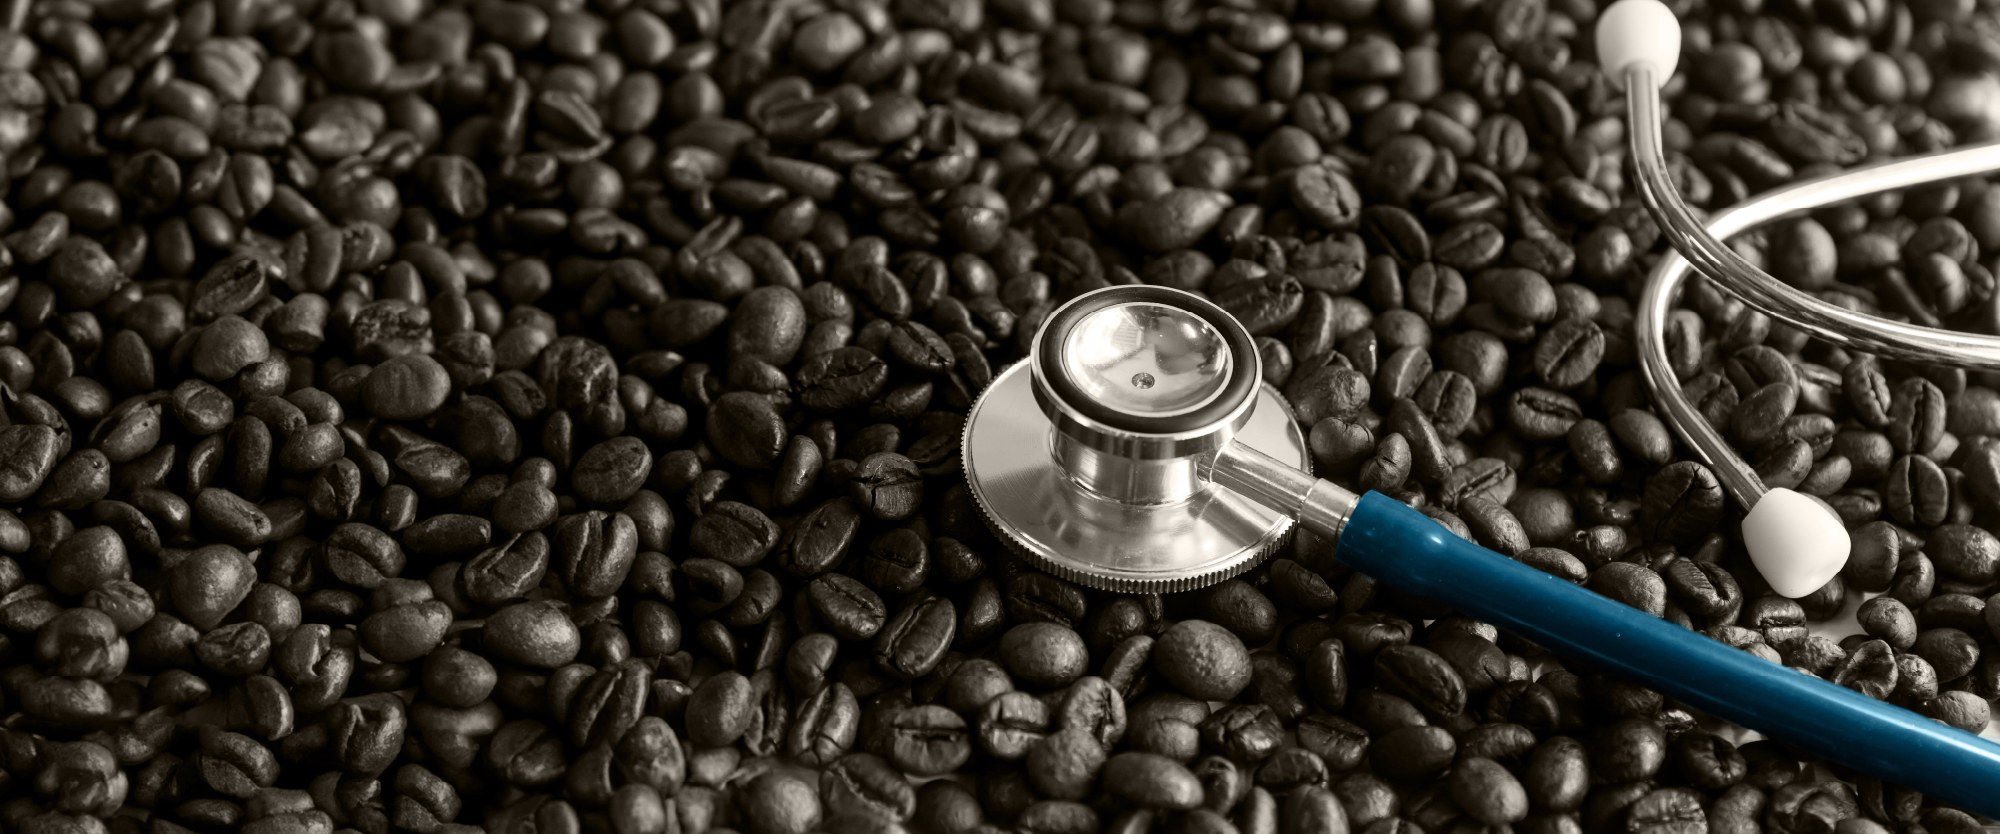 stethoscope over coffee beans